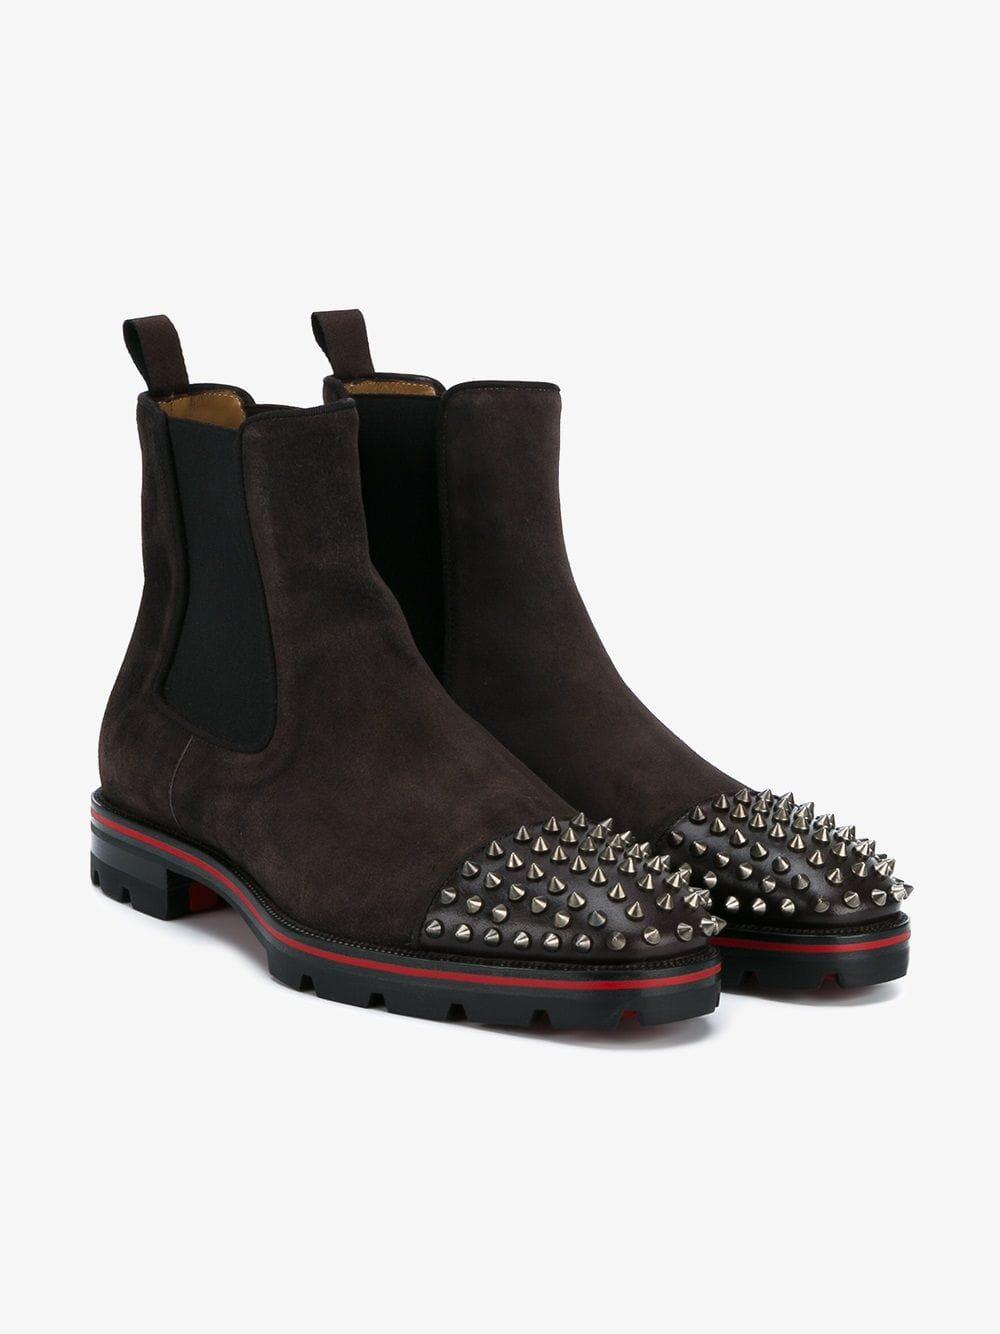 Christian Louboutin Melon Spike-embellished Suede Chelsea Boots in 